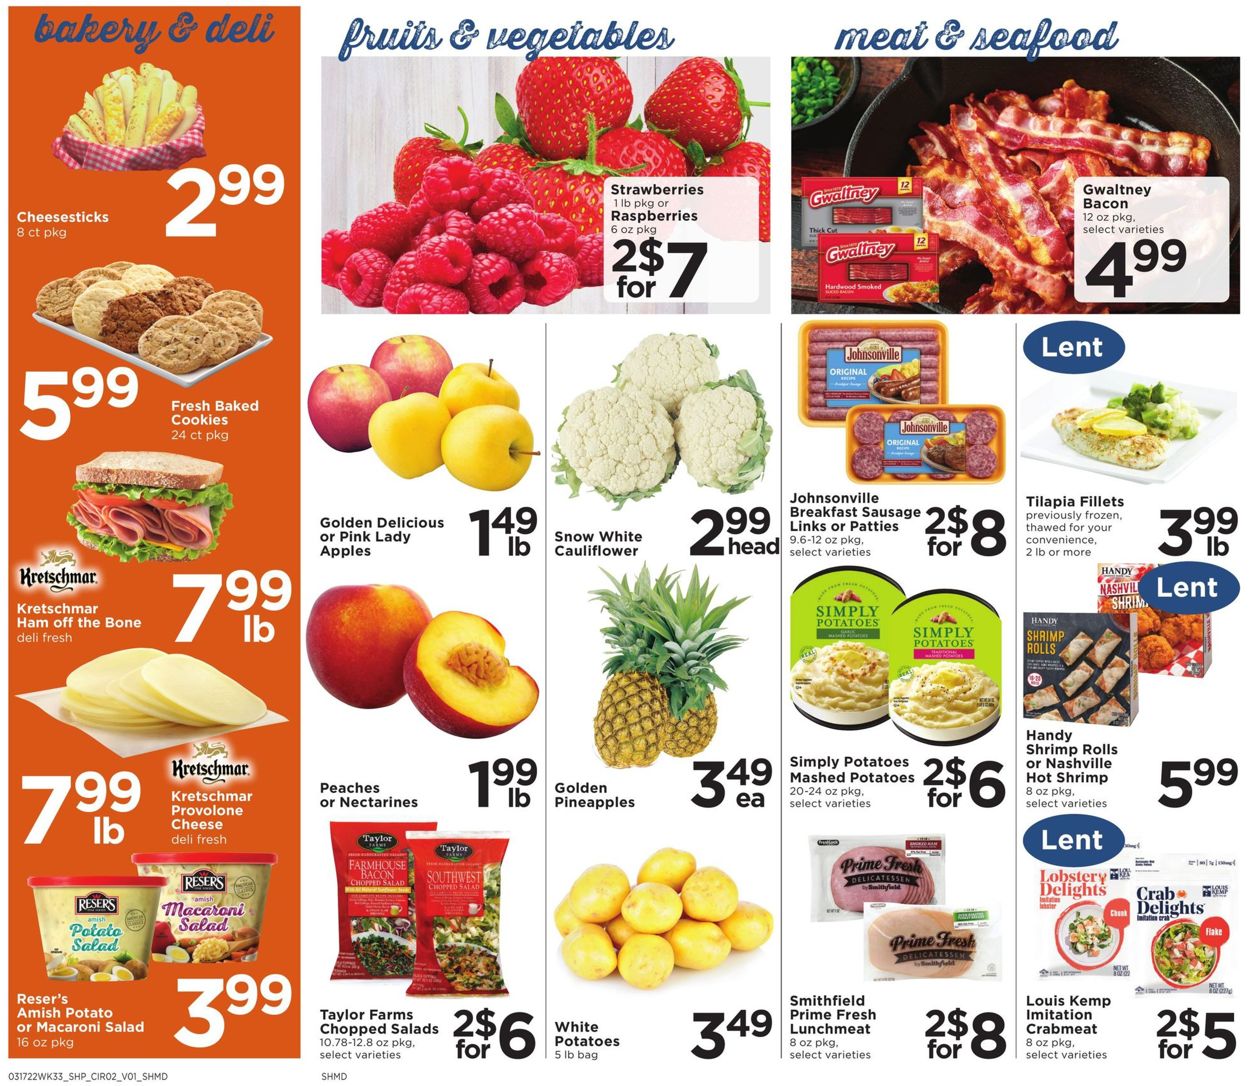 Shoppers Food & Pharmacy Ad from 03/17/2022